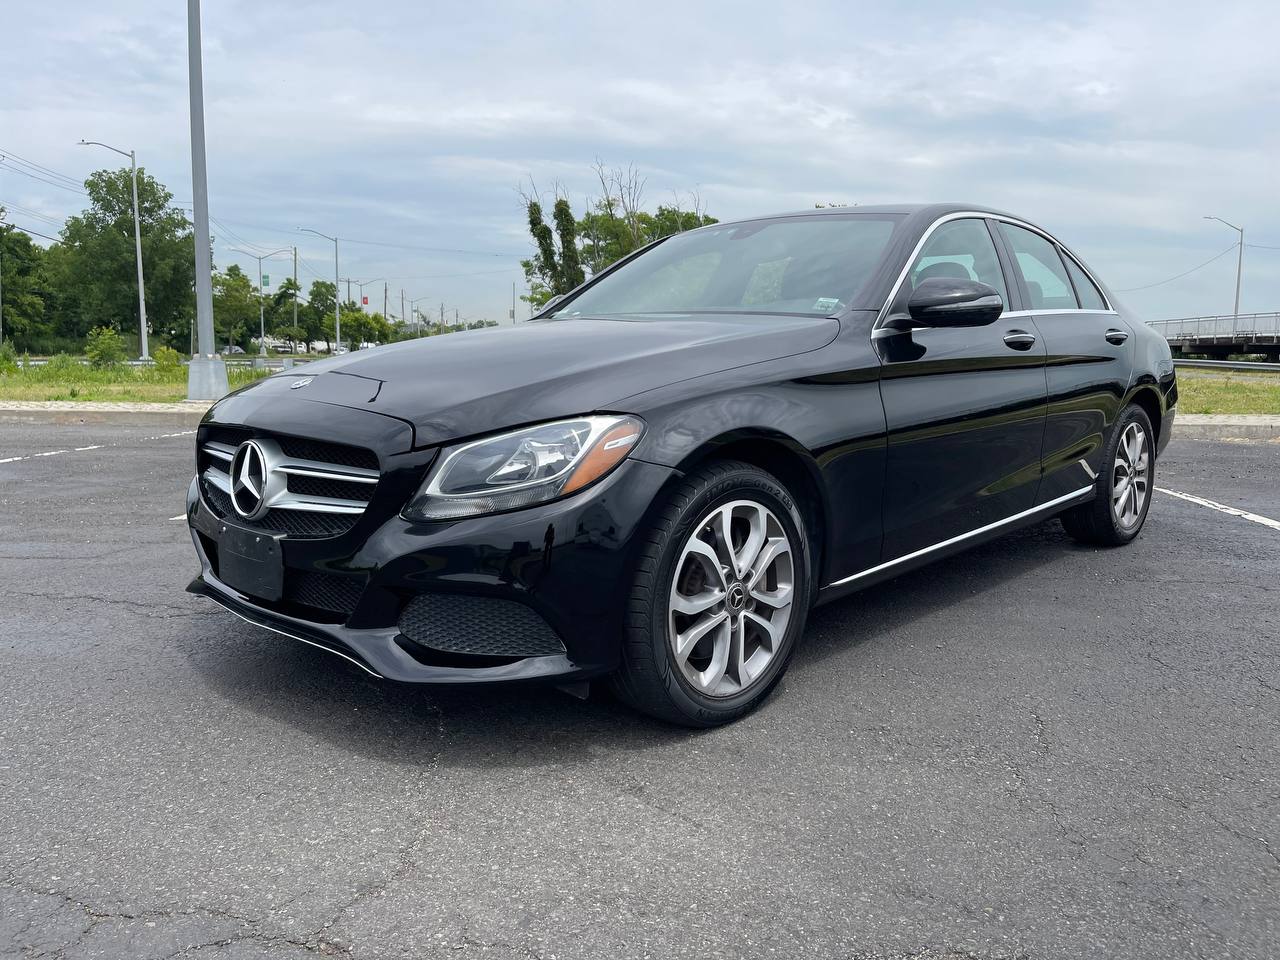 Used Car - 2018 Mercedes-Benz C 300 4MATIC AWD for Sale in Staten Island, NY